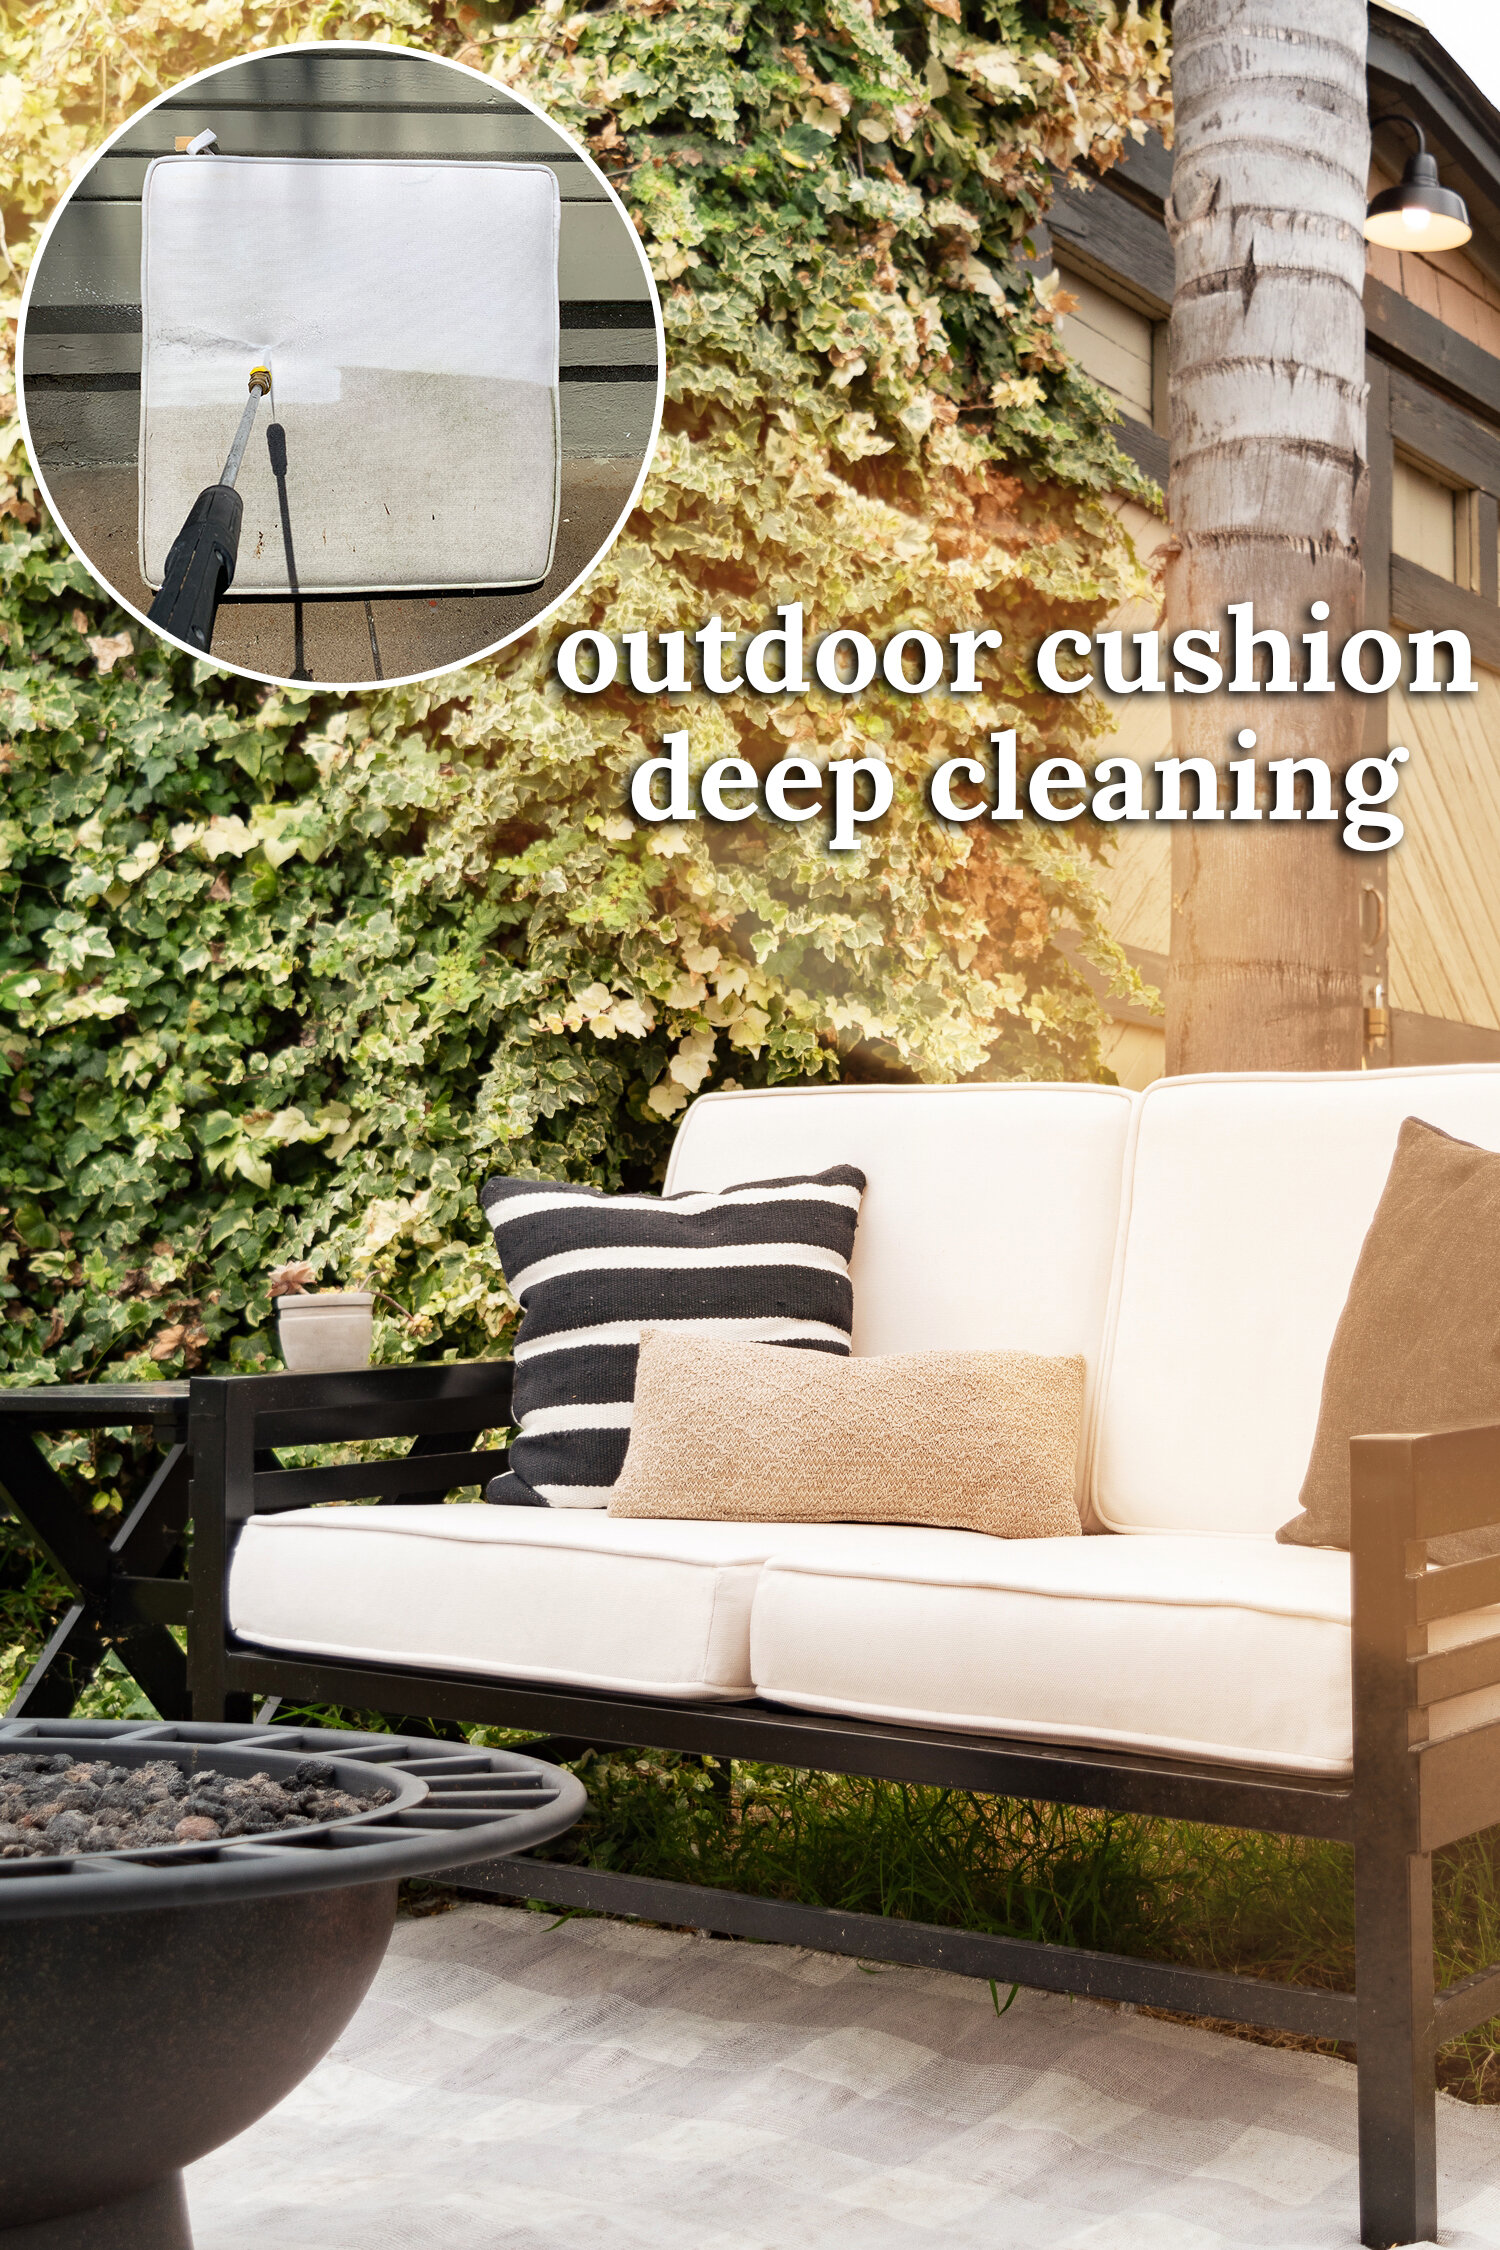 Pressure Washing My Outdoor Cushions, Can You Wash Outdoor Cushion Covers In The Washing Machine